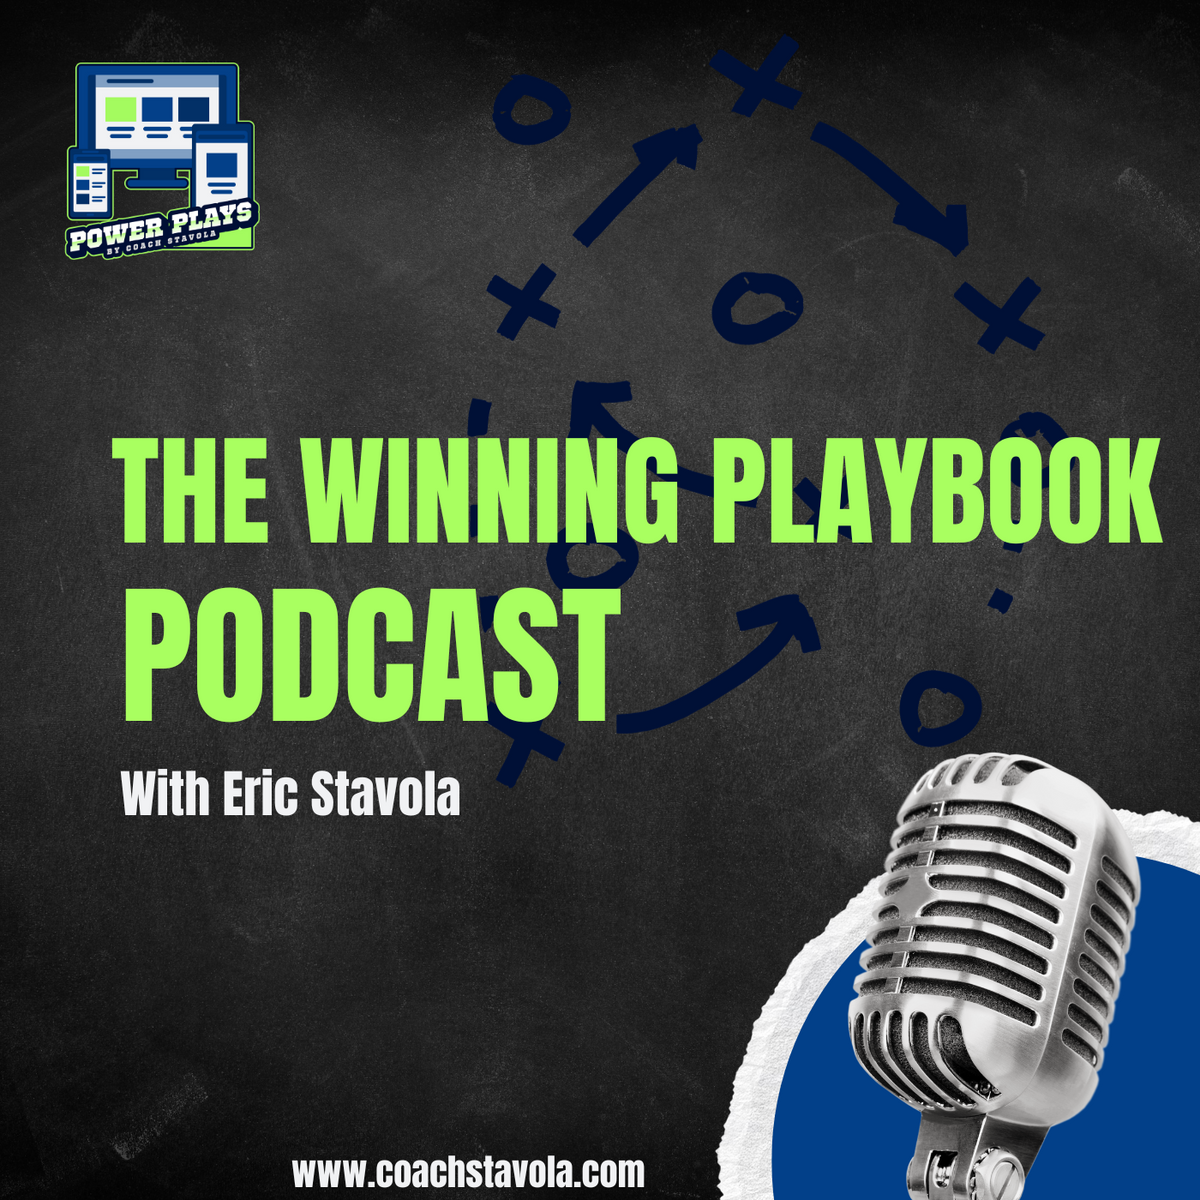 The Winning Playbook Podcast by Eric Stavola